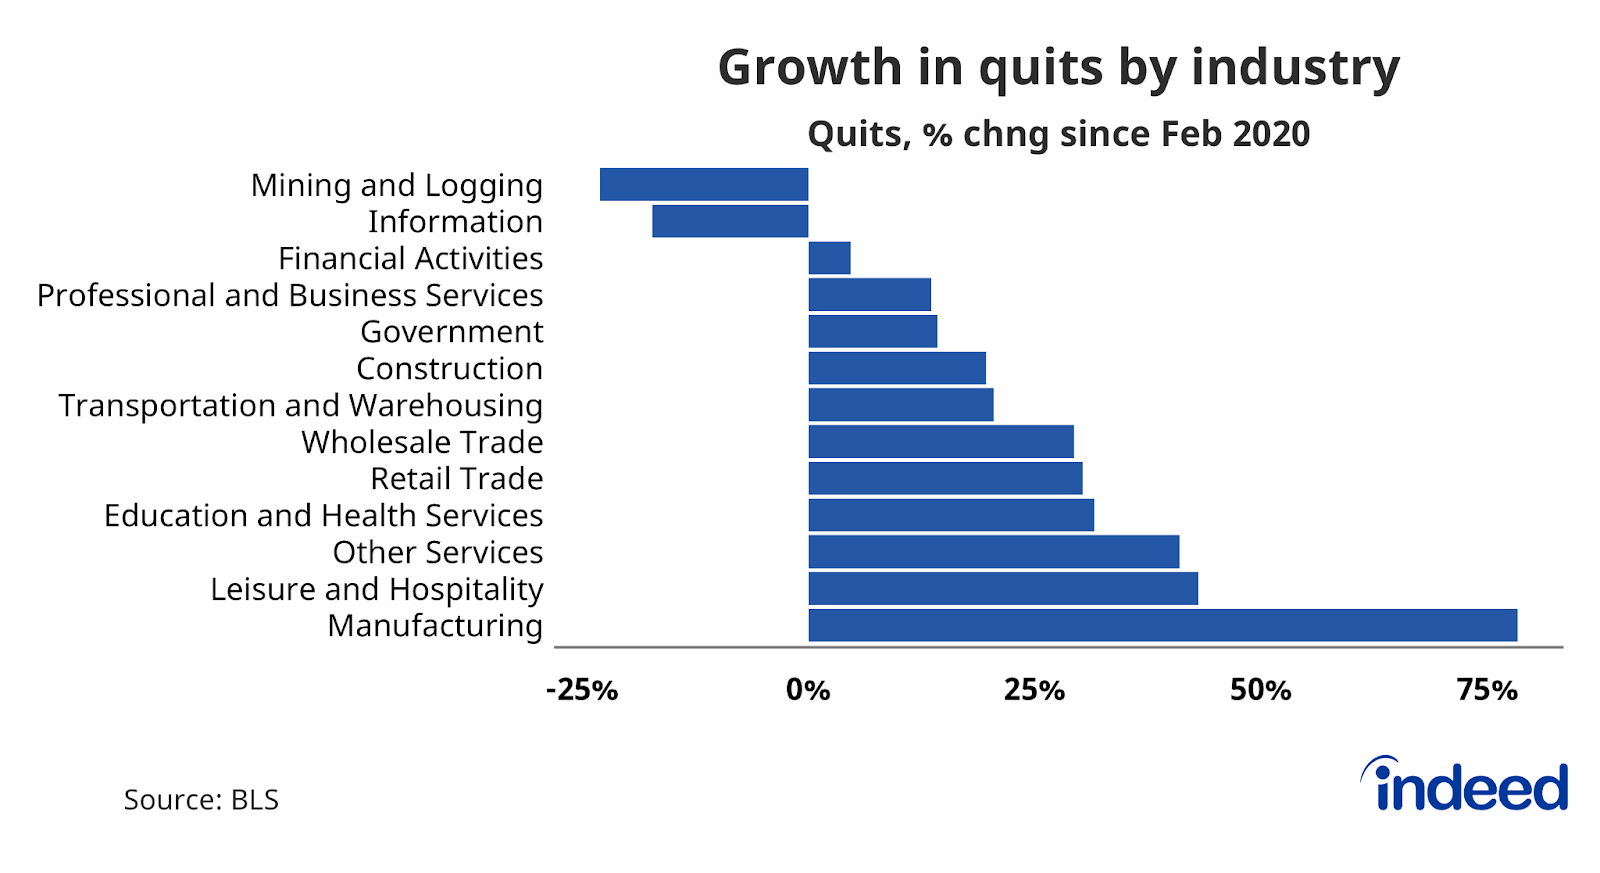 Bar chart showing growth in quits by industry since February 2020.